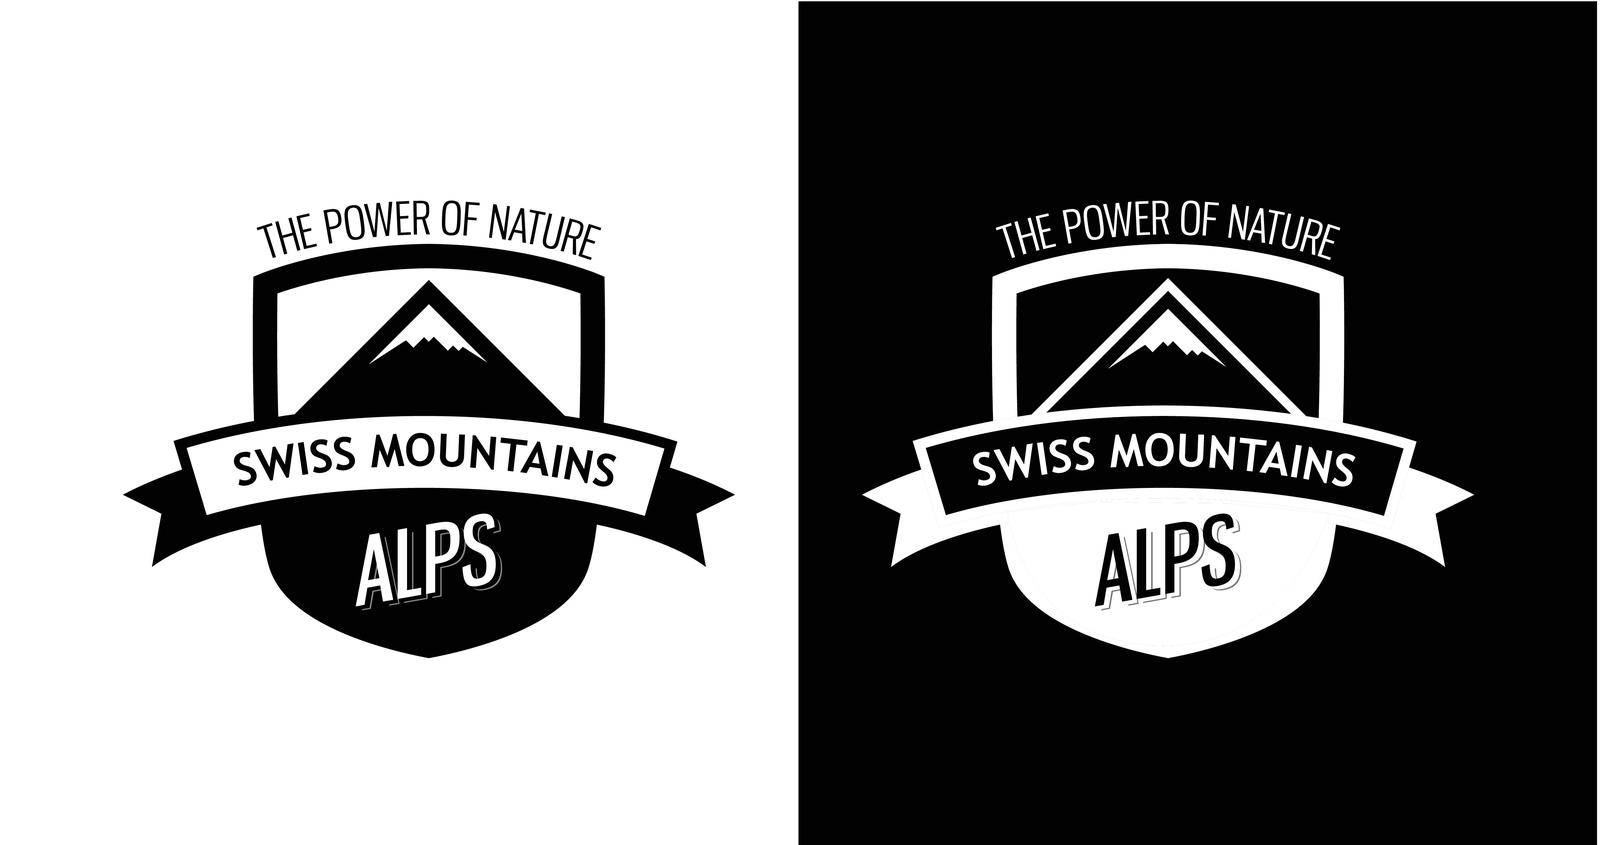 Emblem with Swiss Mountains. Alps of Switzerland on Style Modern Badge isolated on White and Black color.